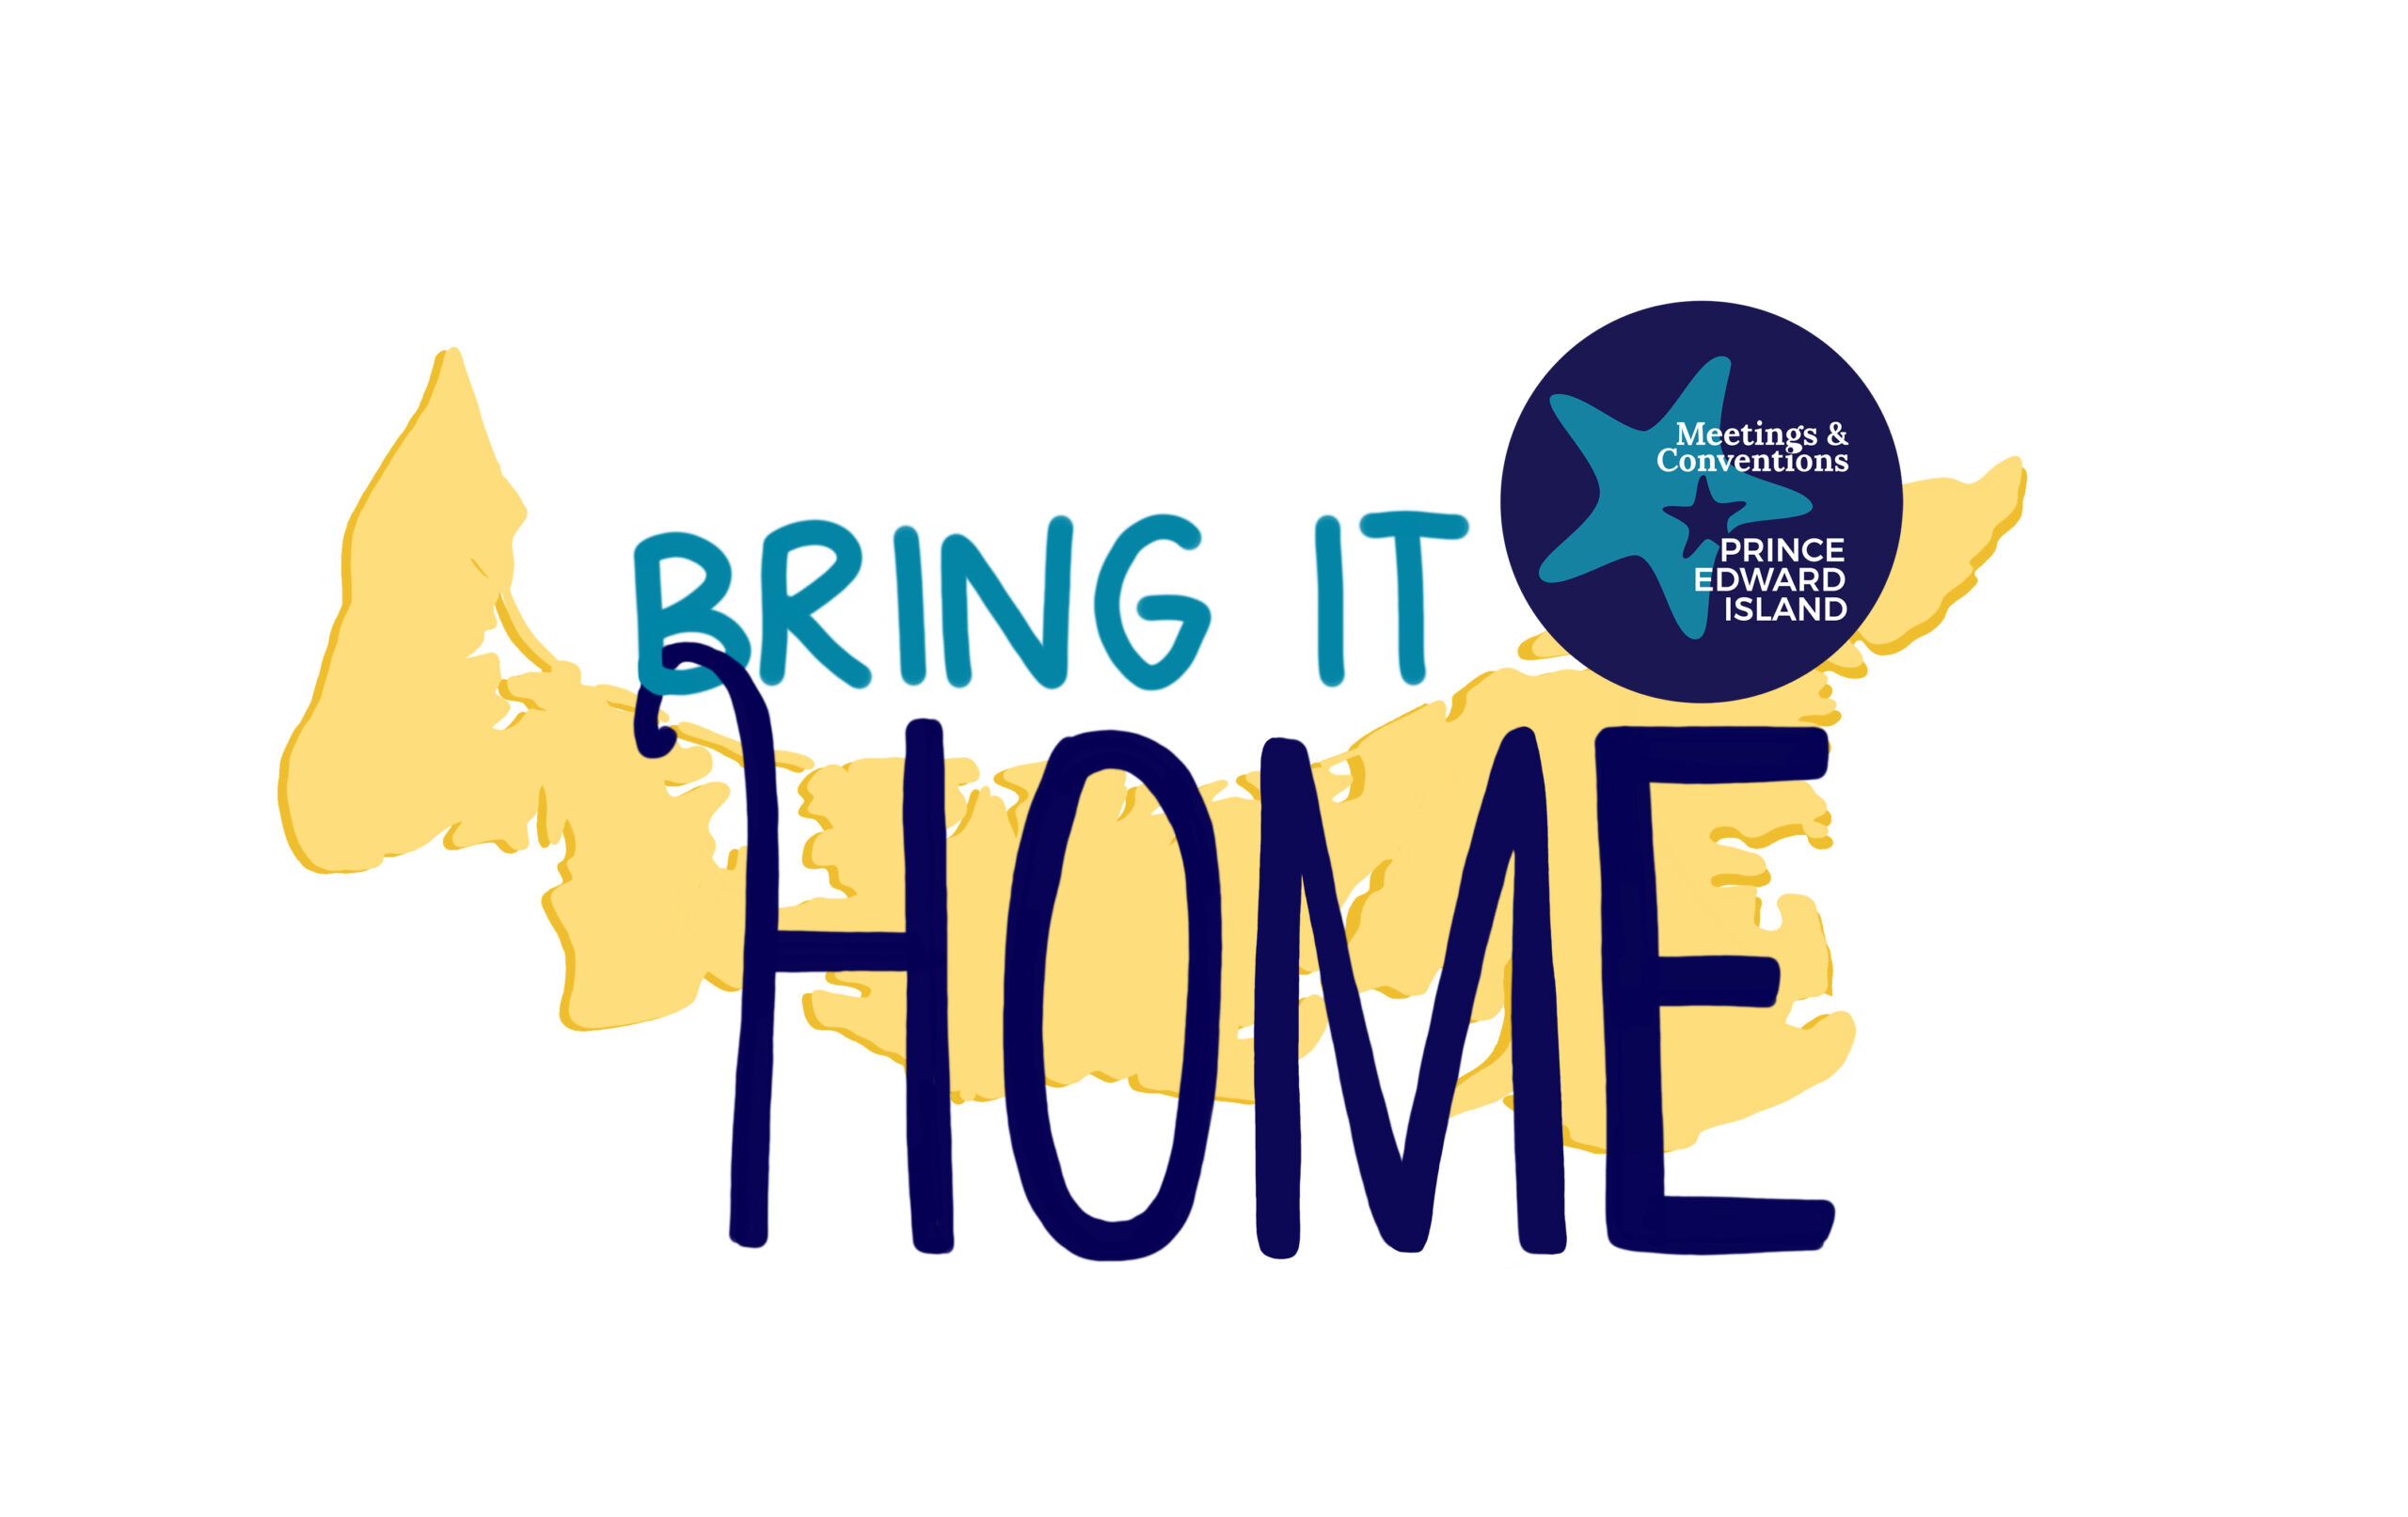 Logo- image of Prince Edward Island with blue and navy text saying "Bring It Home"